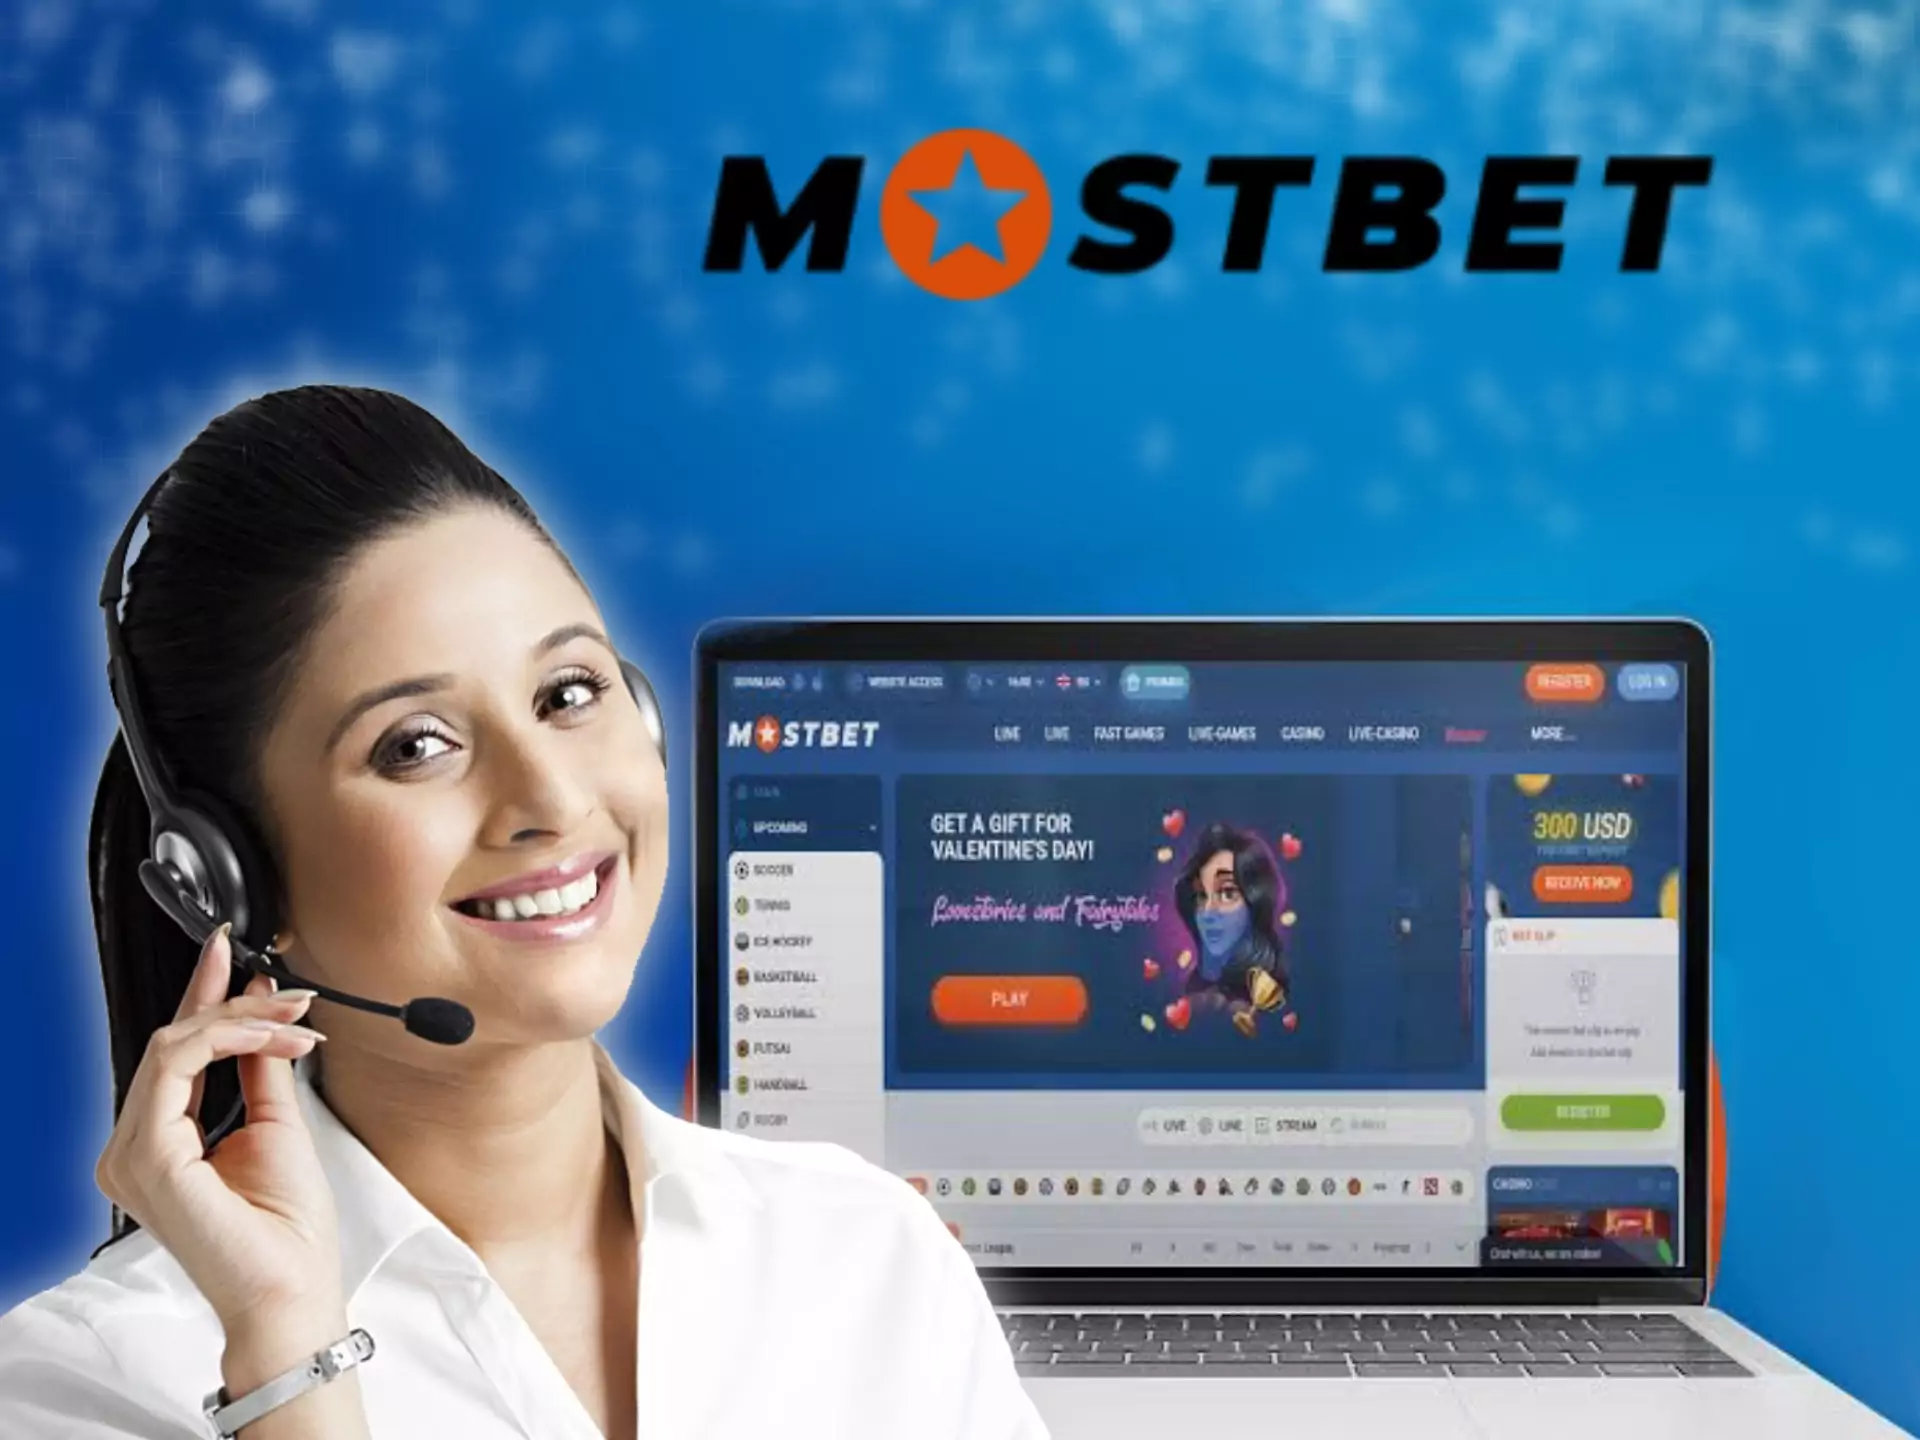 Mostbet customer support is there 24/7 to solve your problems.